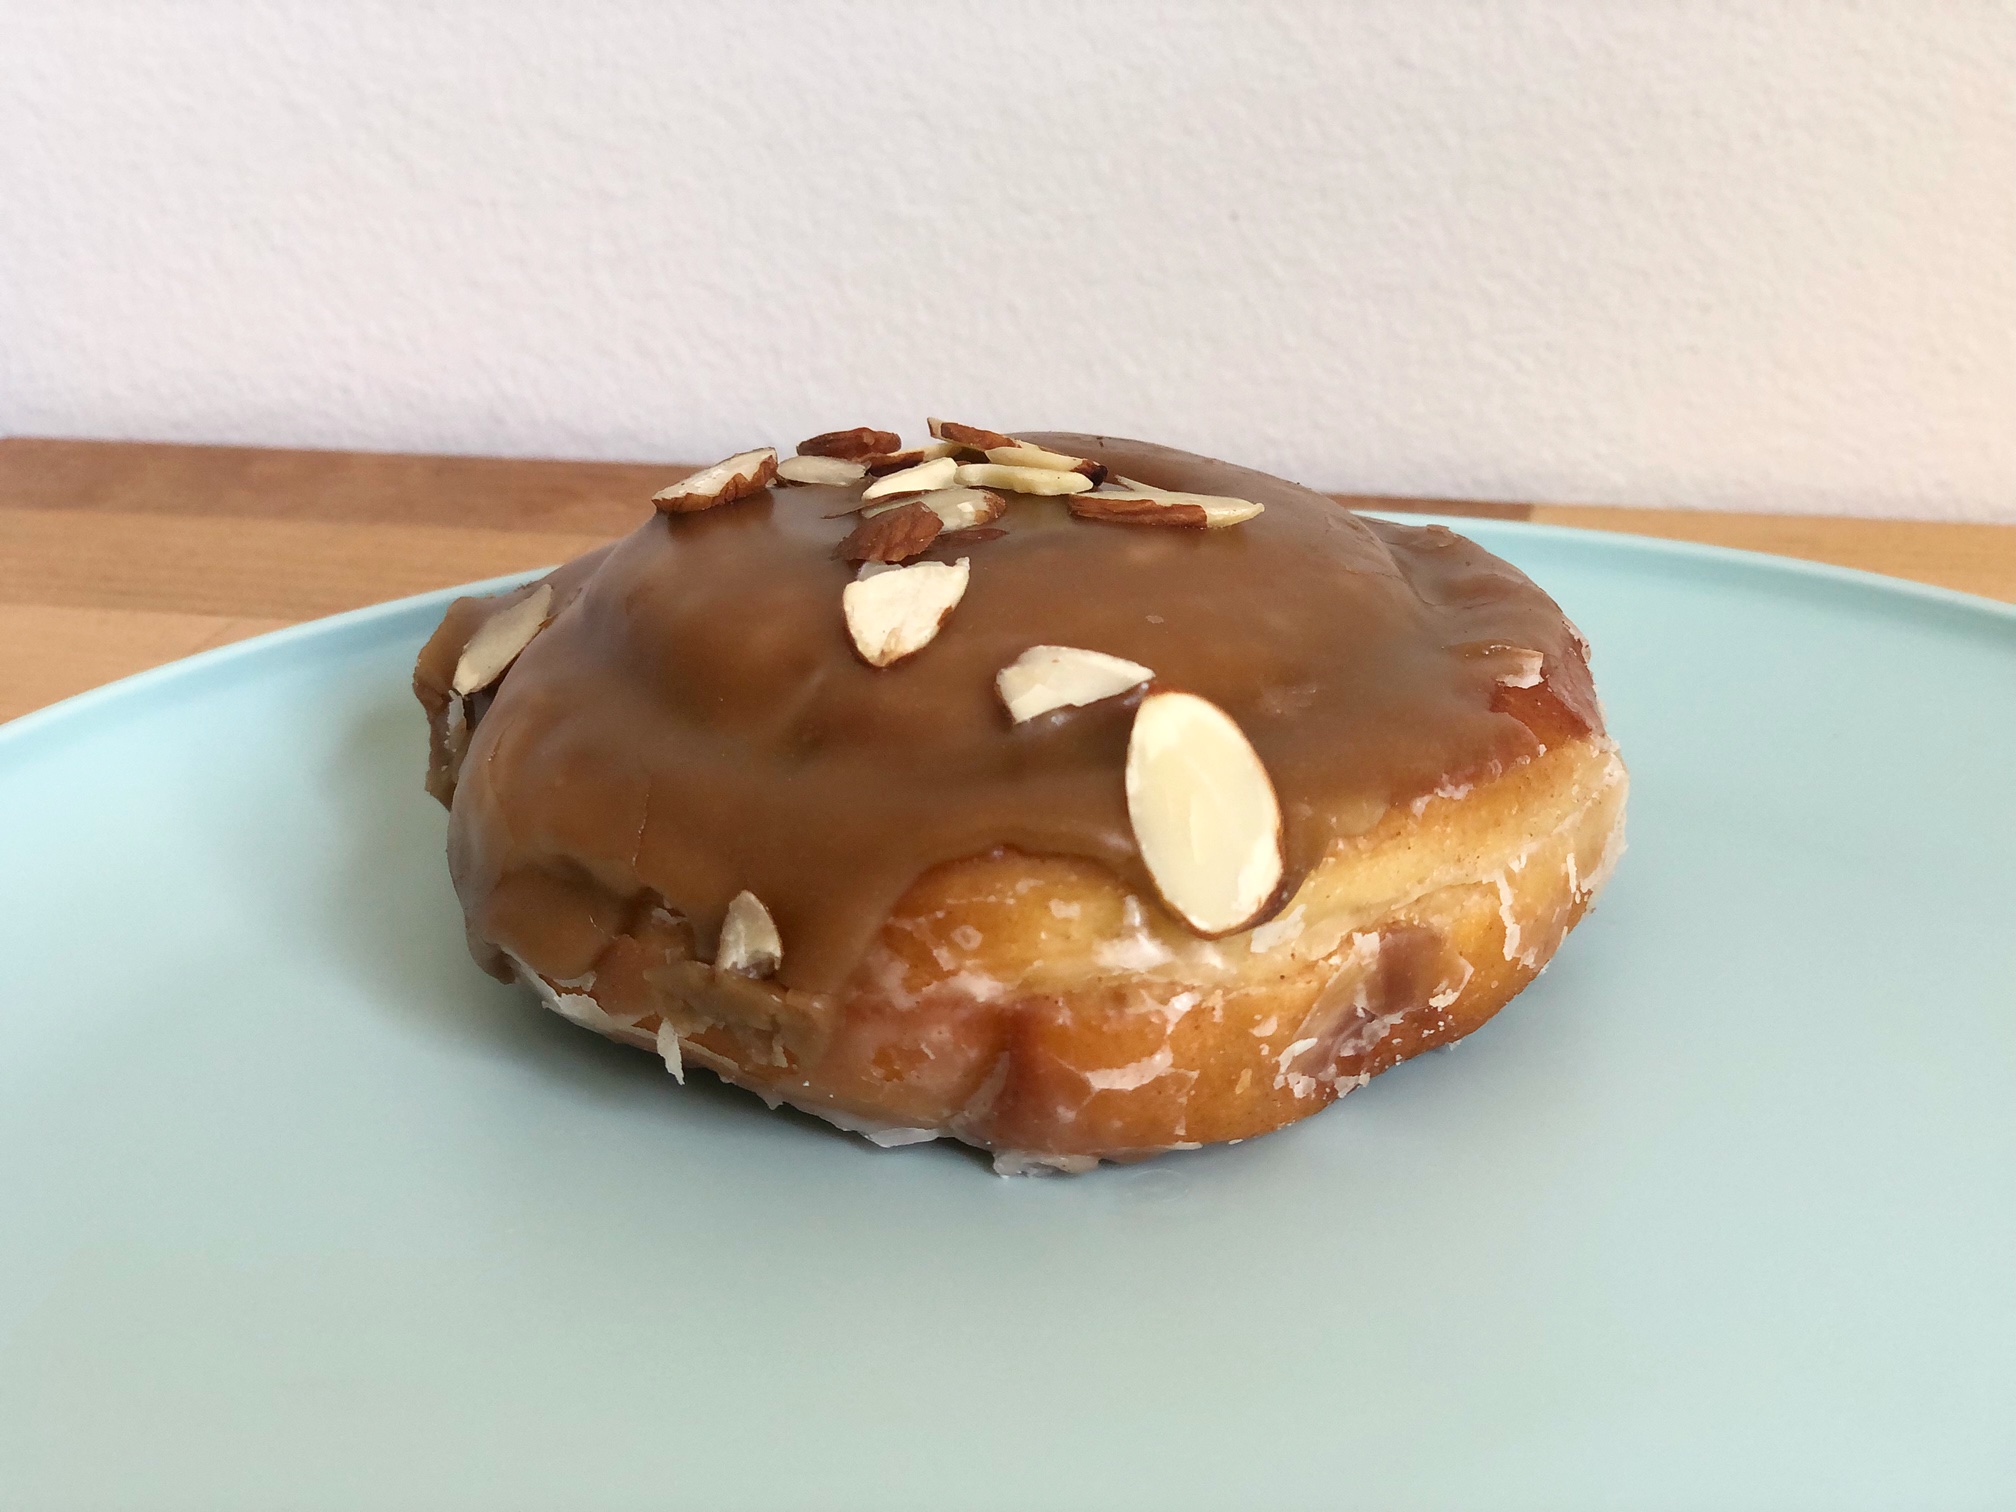 On a pale blue plate, there is a frosted donut with slivered almonds on top. The plate is on a wooden butcher block counter in front of a white wall. Photo by Alyssa Buckley.